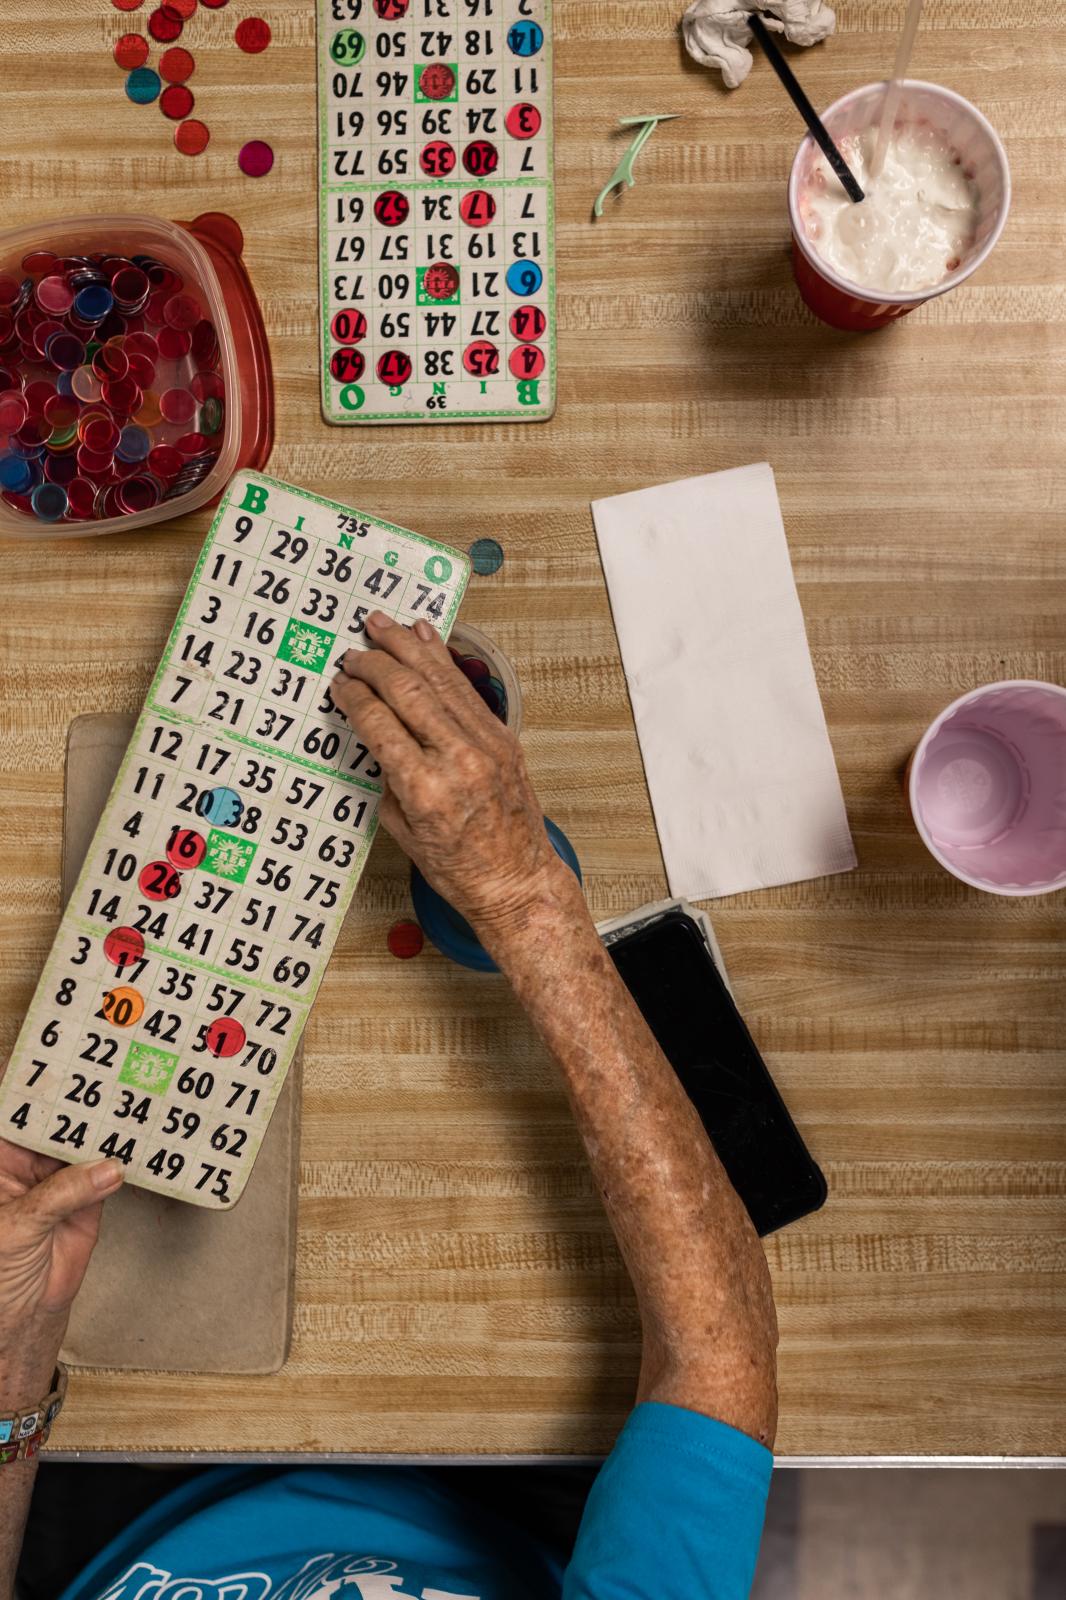 Post 67: American Legion, American Stories - A typical bingo setup at the post involves anything from cards, drinks, good luck charms and...